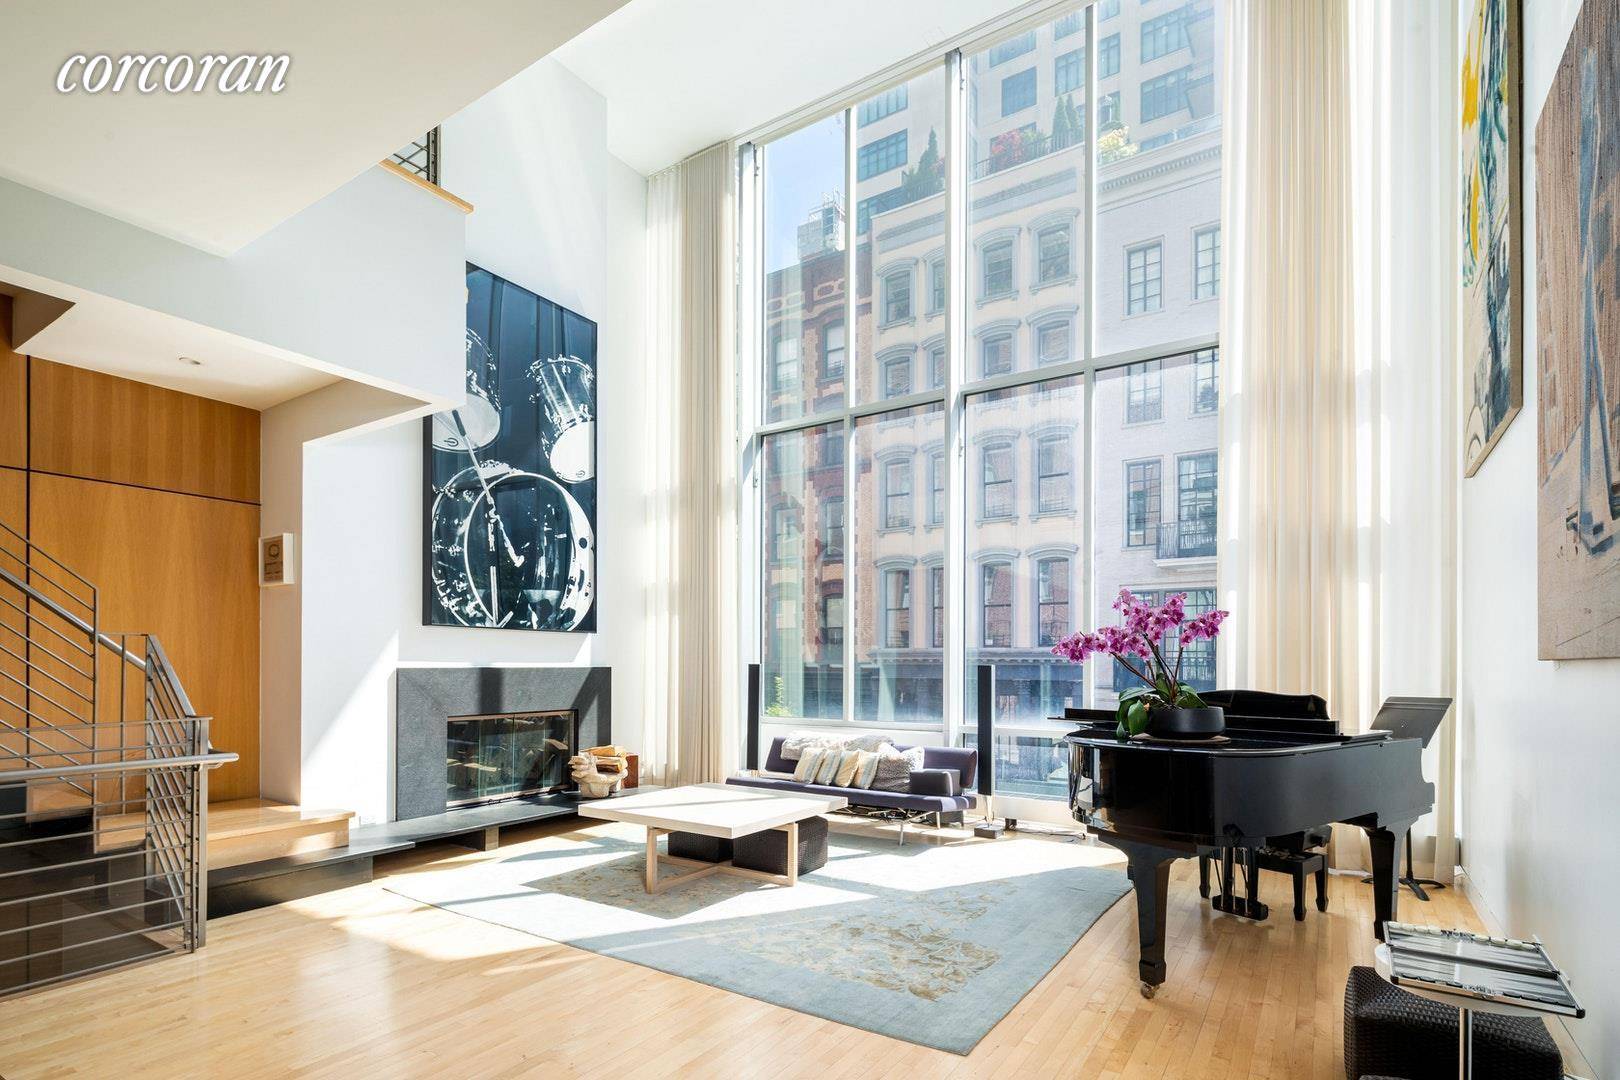 An exceptional opportunity awaits in a one of a kind townhouse in Tribeca, one of the most desired Manhattan neighborhoods.